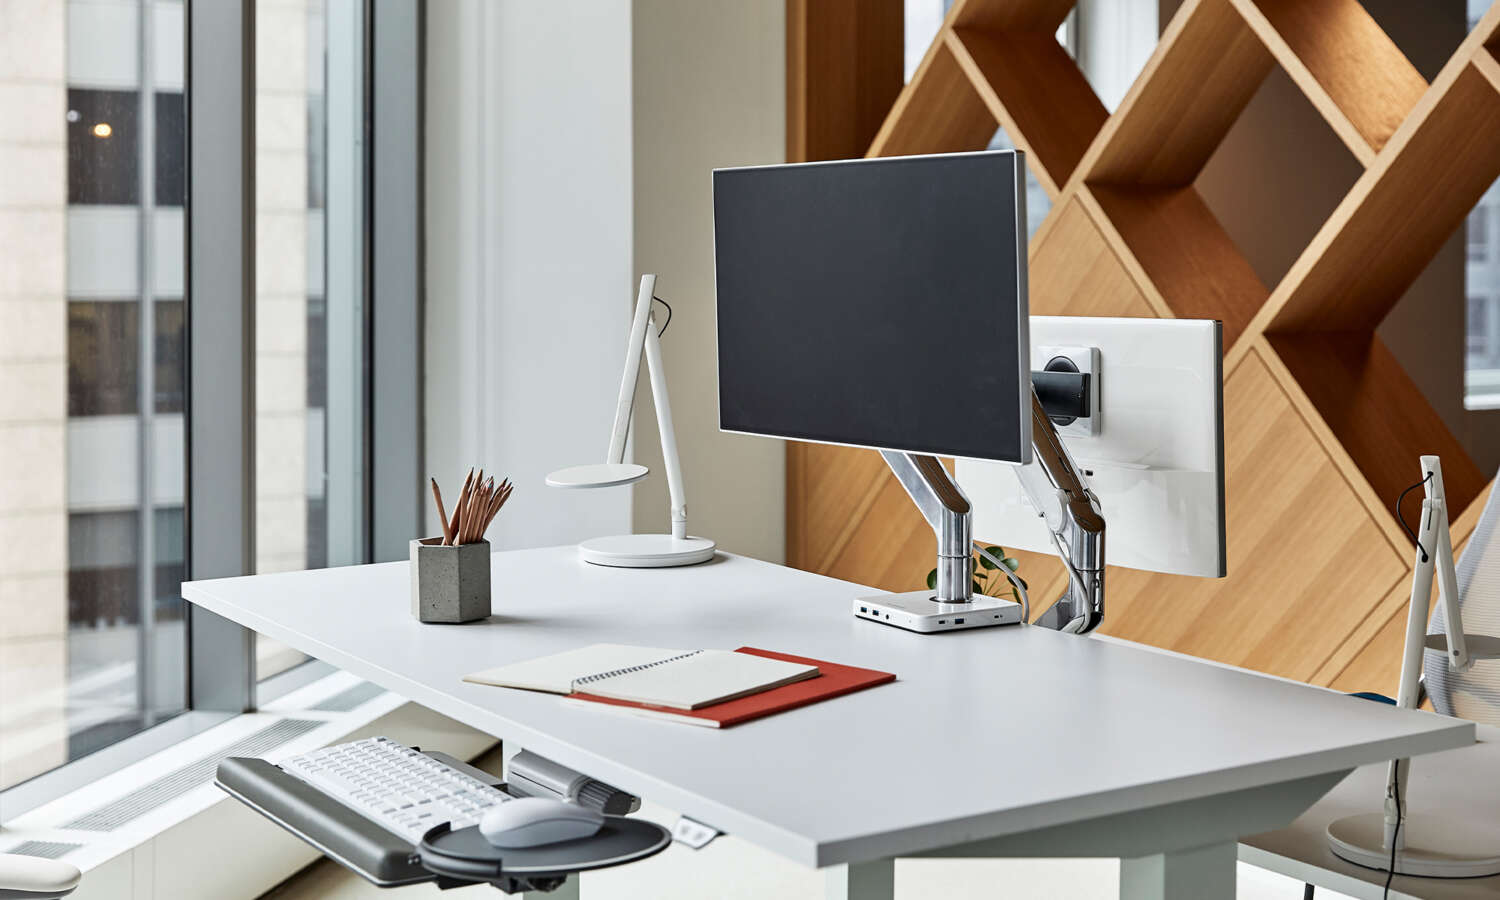 A workspace with technology to help with organization